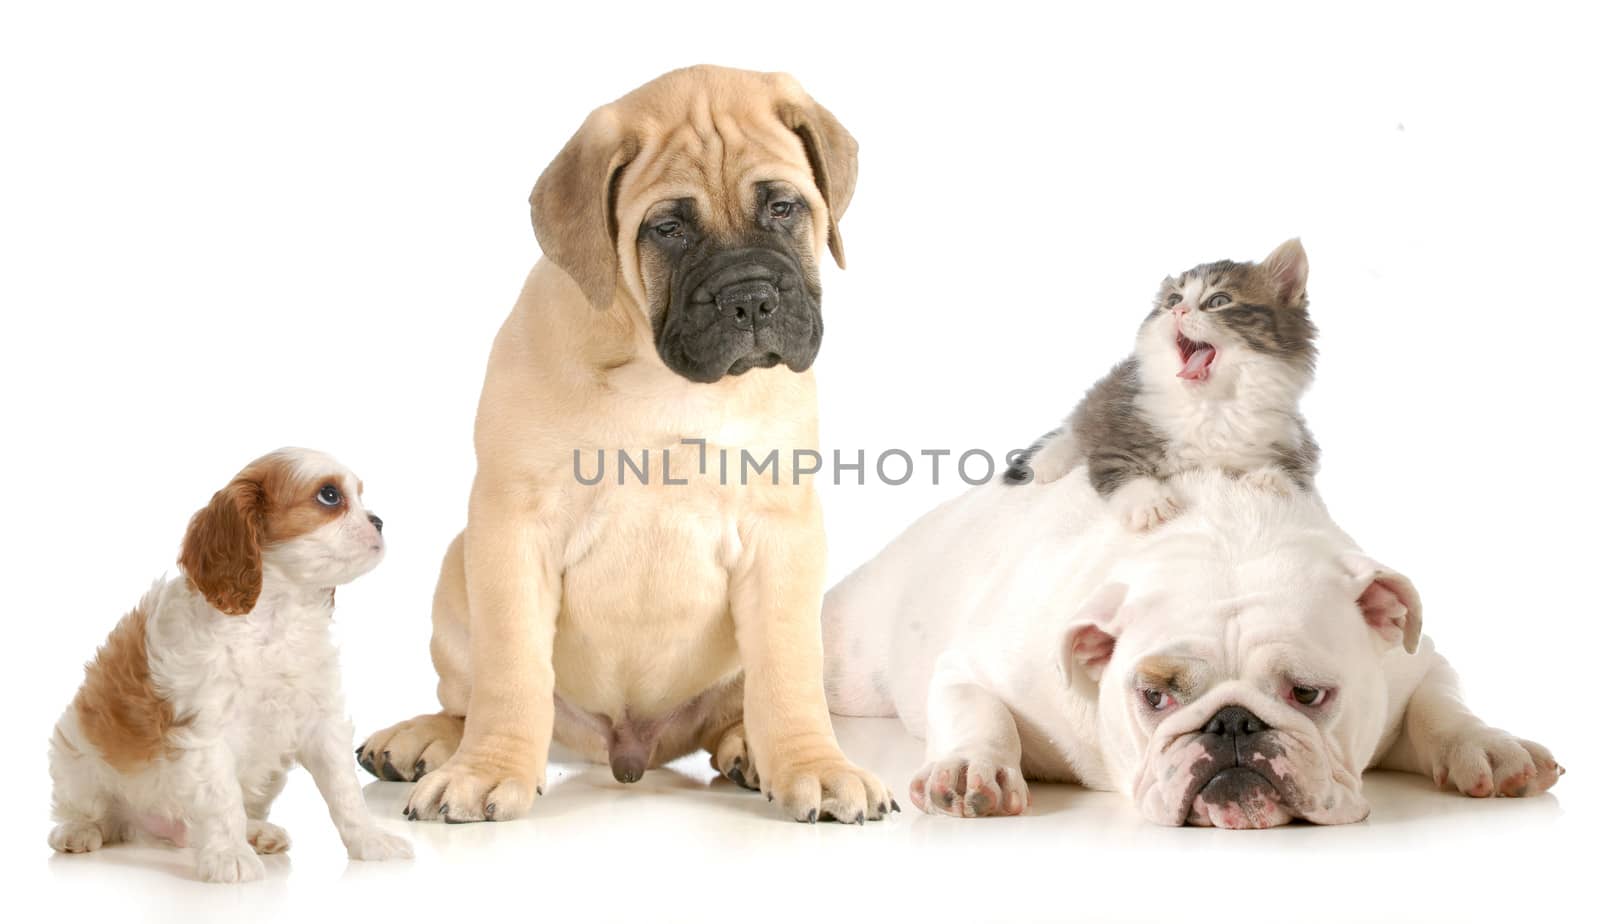 dog and cat fight - cavalier king charles spaniel, bull mastiff, english bulldog and domestic long haired kitten arguing isolated on white background